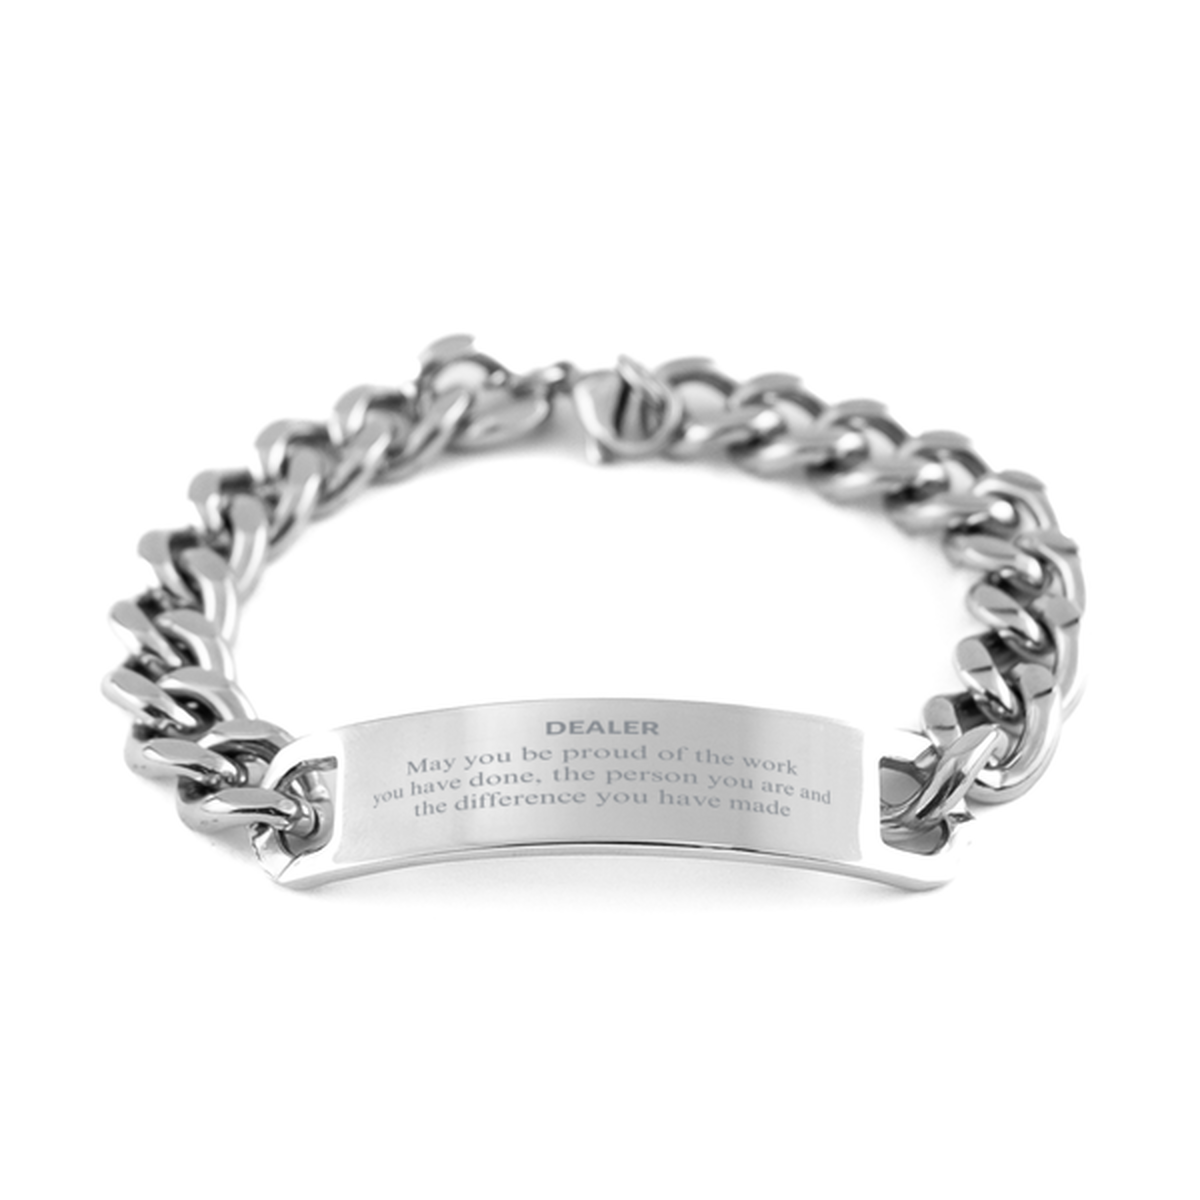 Dealer May you be proud of the work you have done, Retirement Dealer Cuban Chain Stainless Steel Bracelet for Colleague Appreciation Gifts Amazing for Dealer